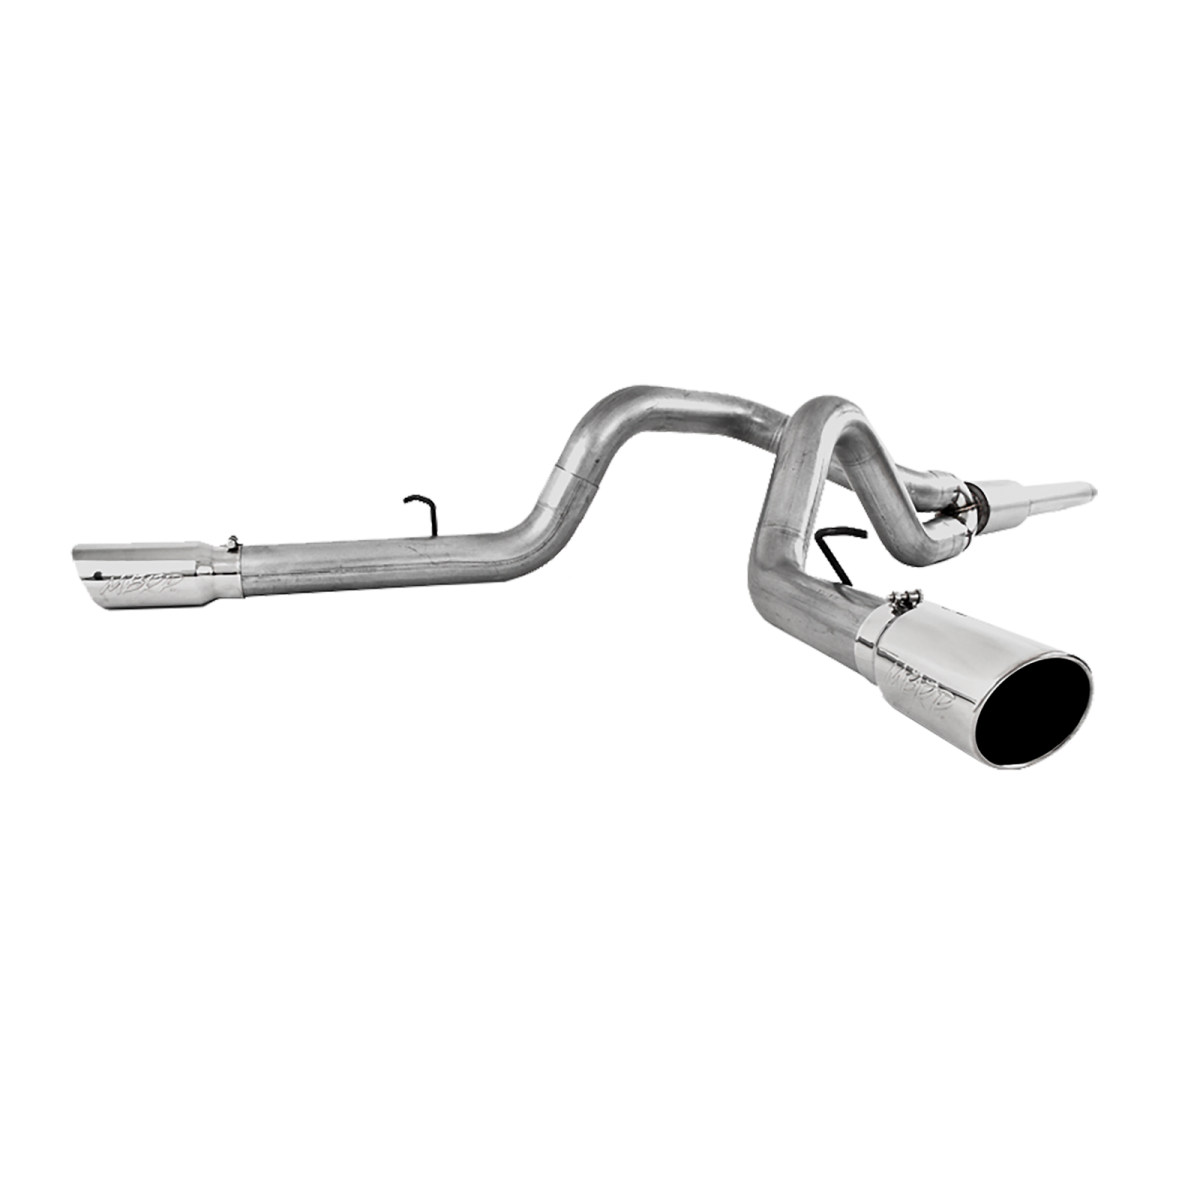 MBRP - MBRP Cat Back Exhaust System 4 Inch Dual Split Side Aluminized Steel For 99-04 Ford F-250/350 V-10 S5208AL